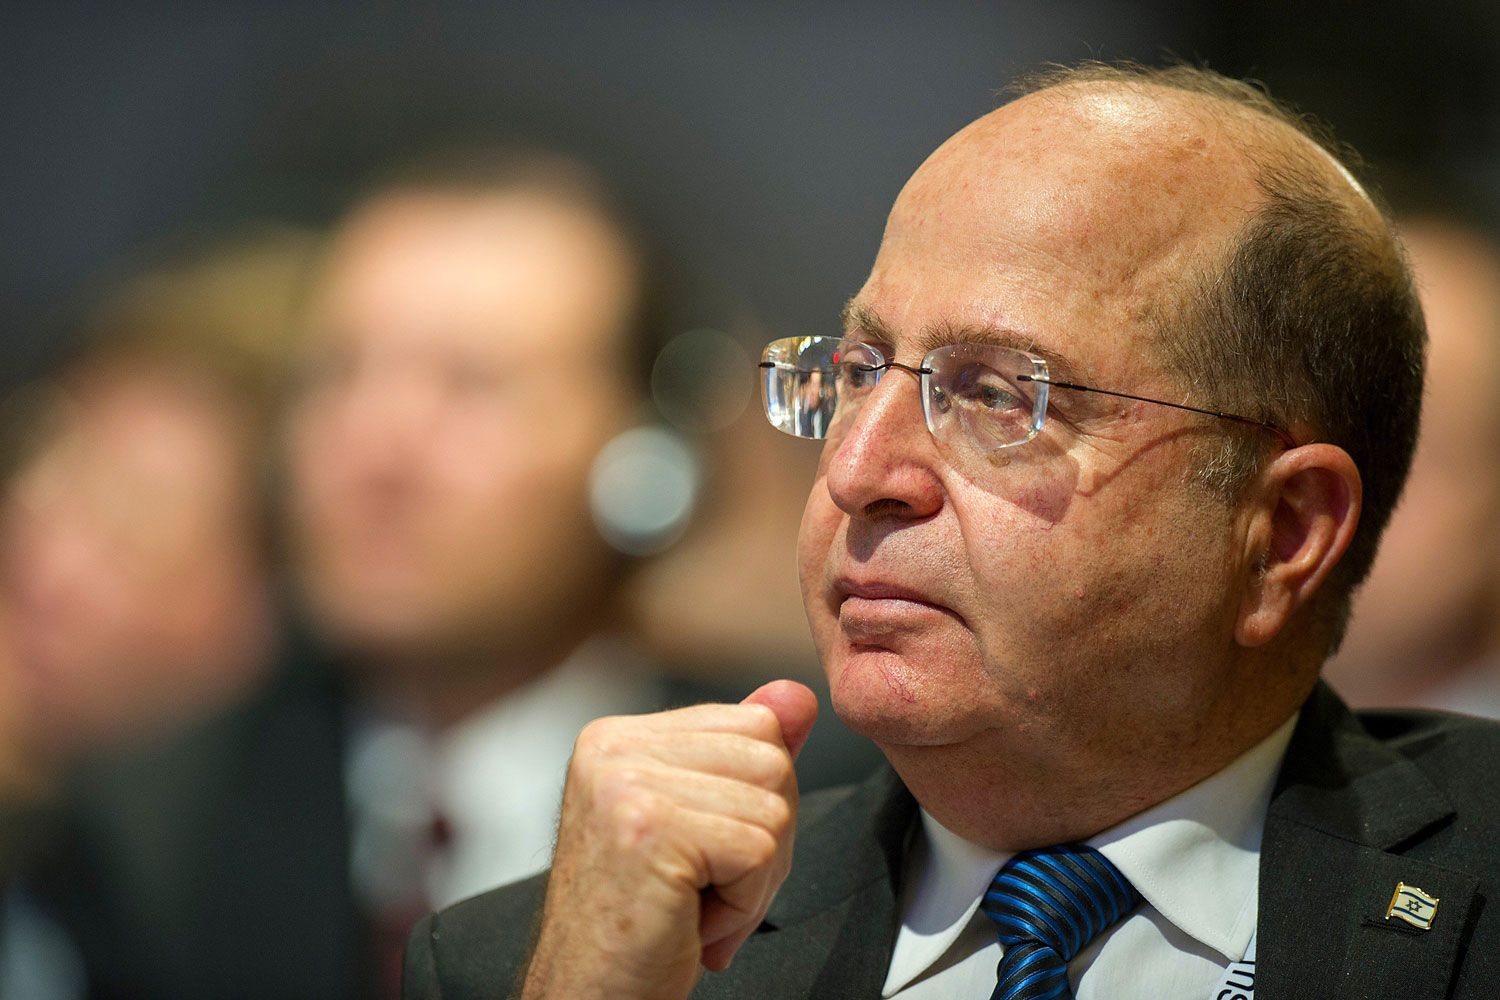 Israeli Defense Minister Moshe Ya'alon attends a meeting session of the Munich Security Conference in Munich, Feb. 2, 2014.